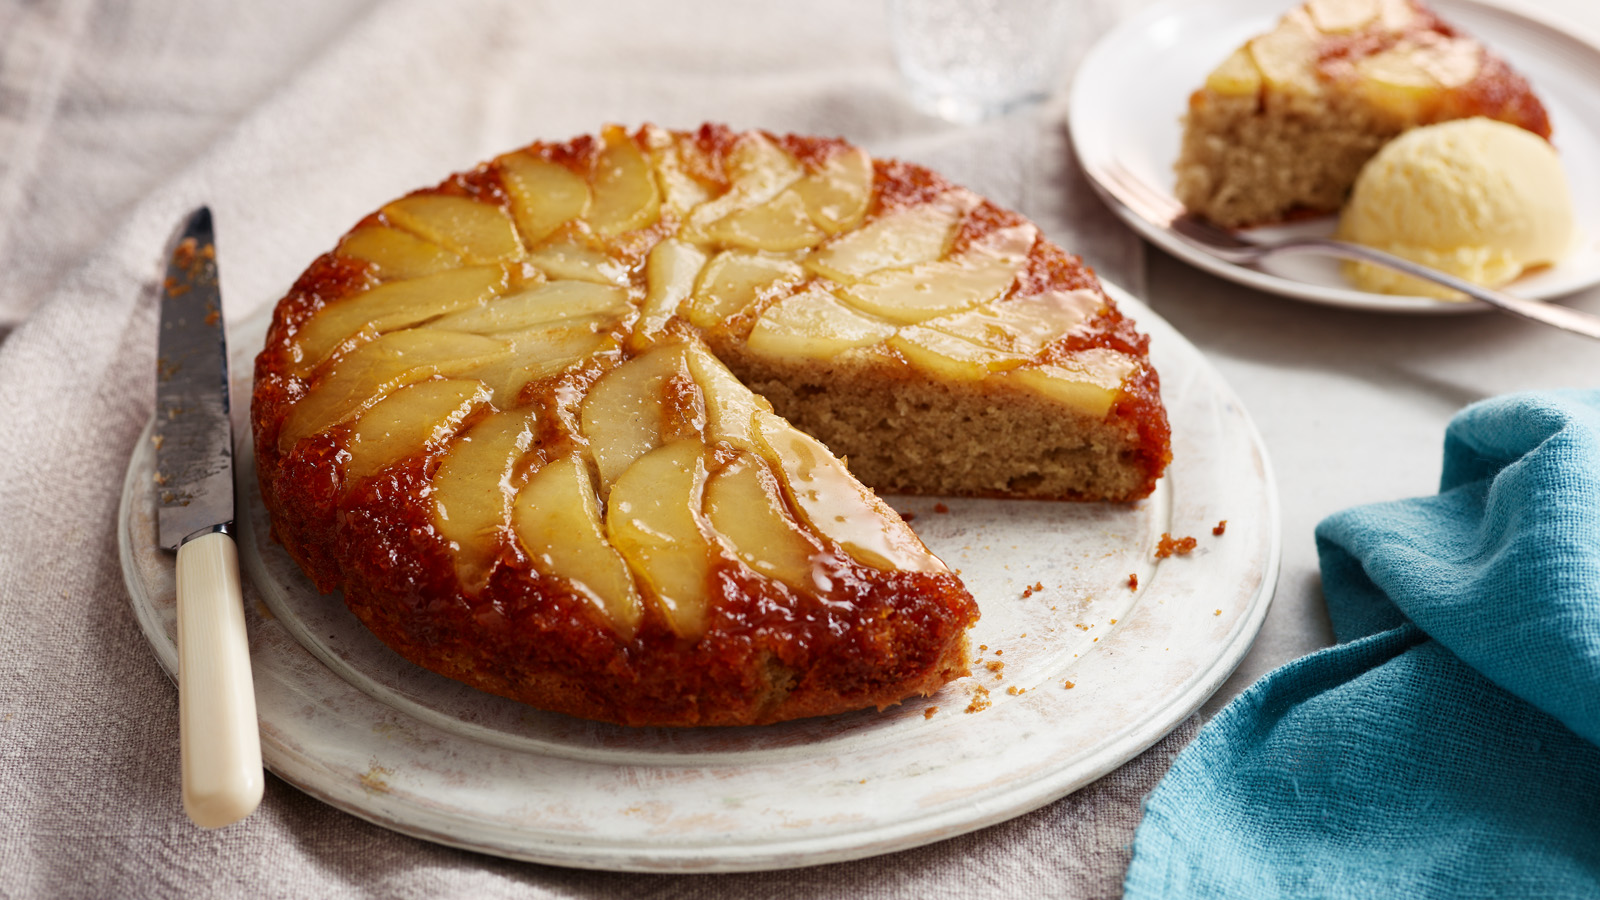 Pear and ginger cake recipe